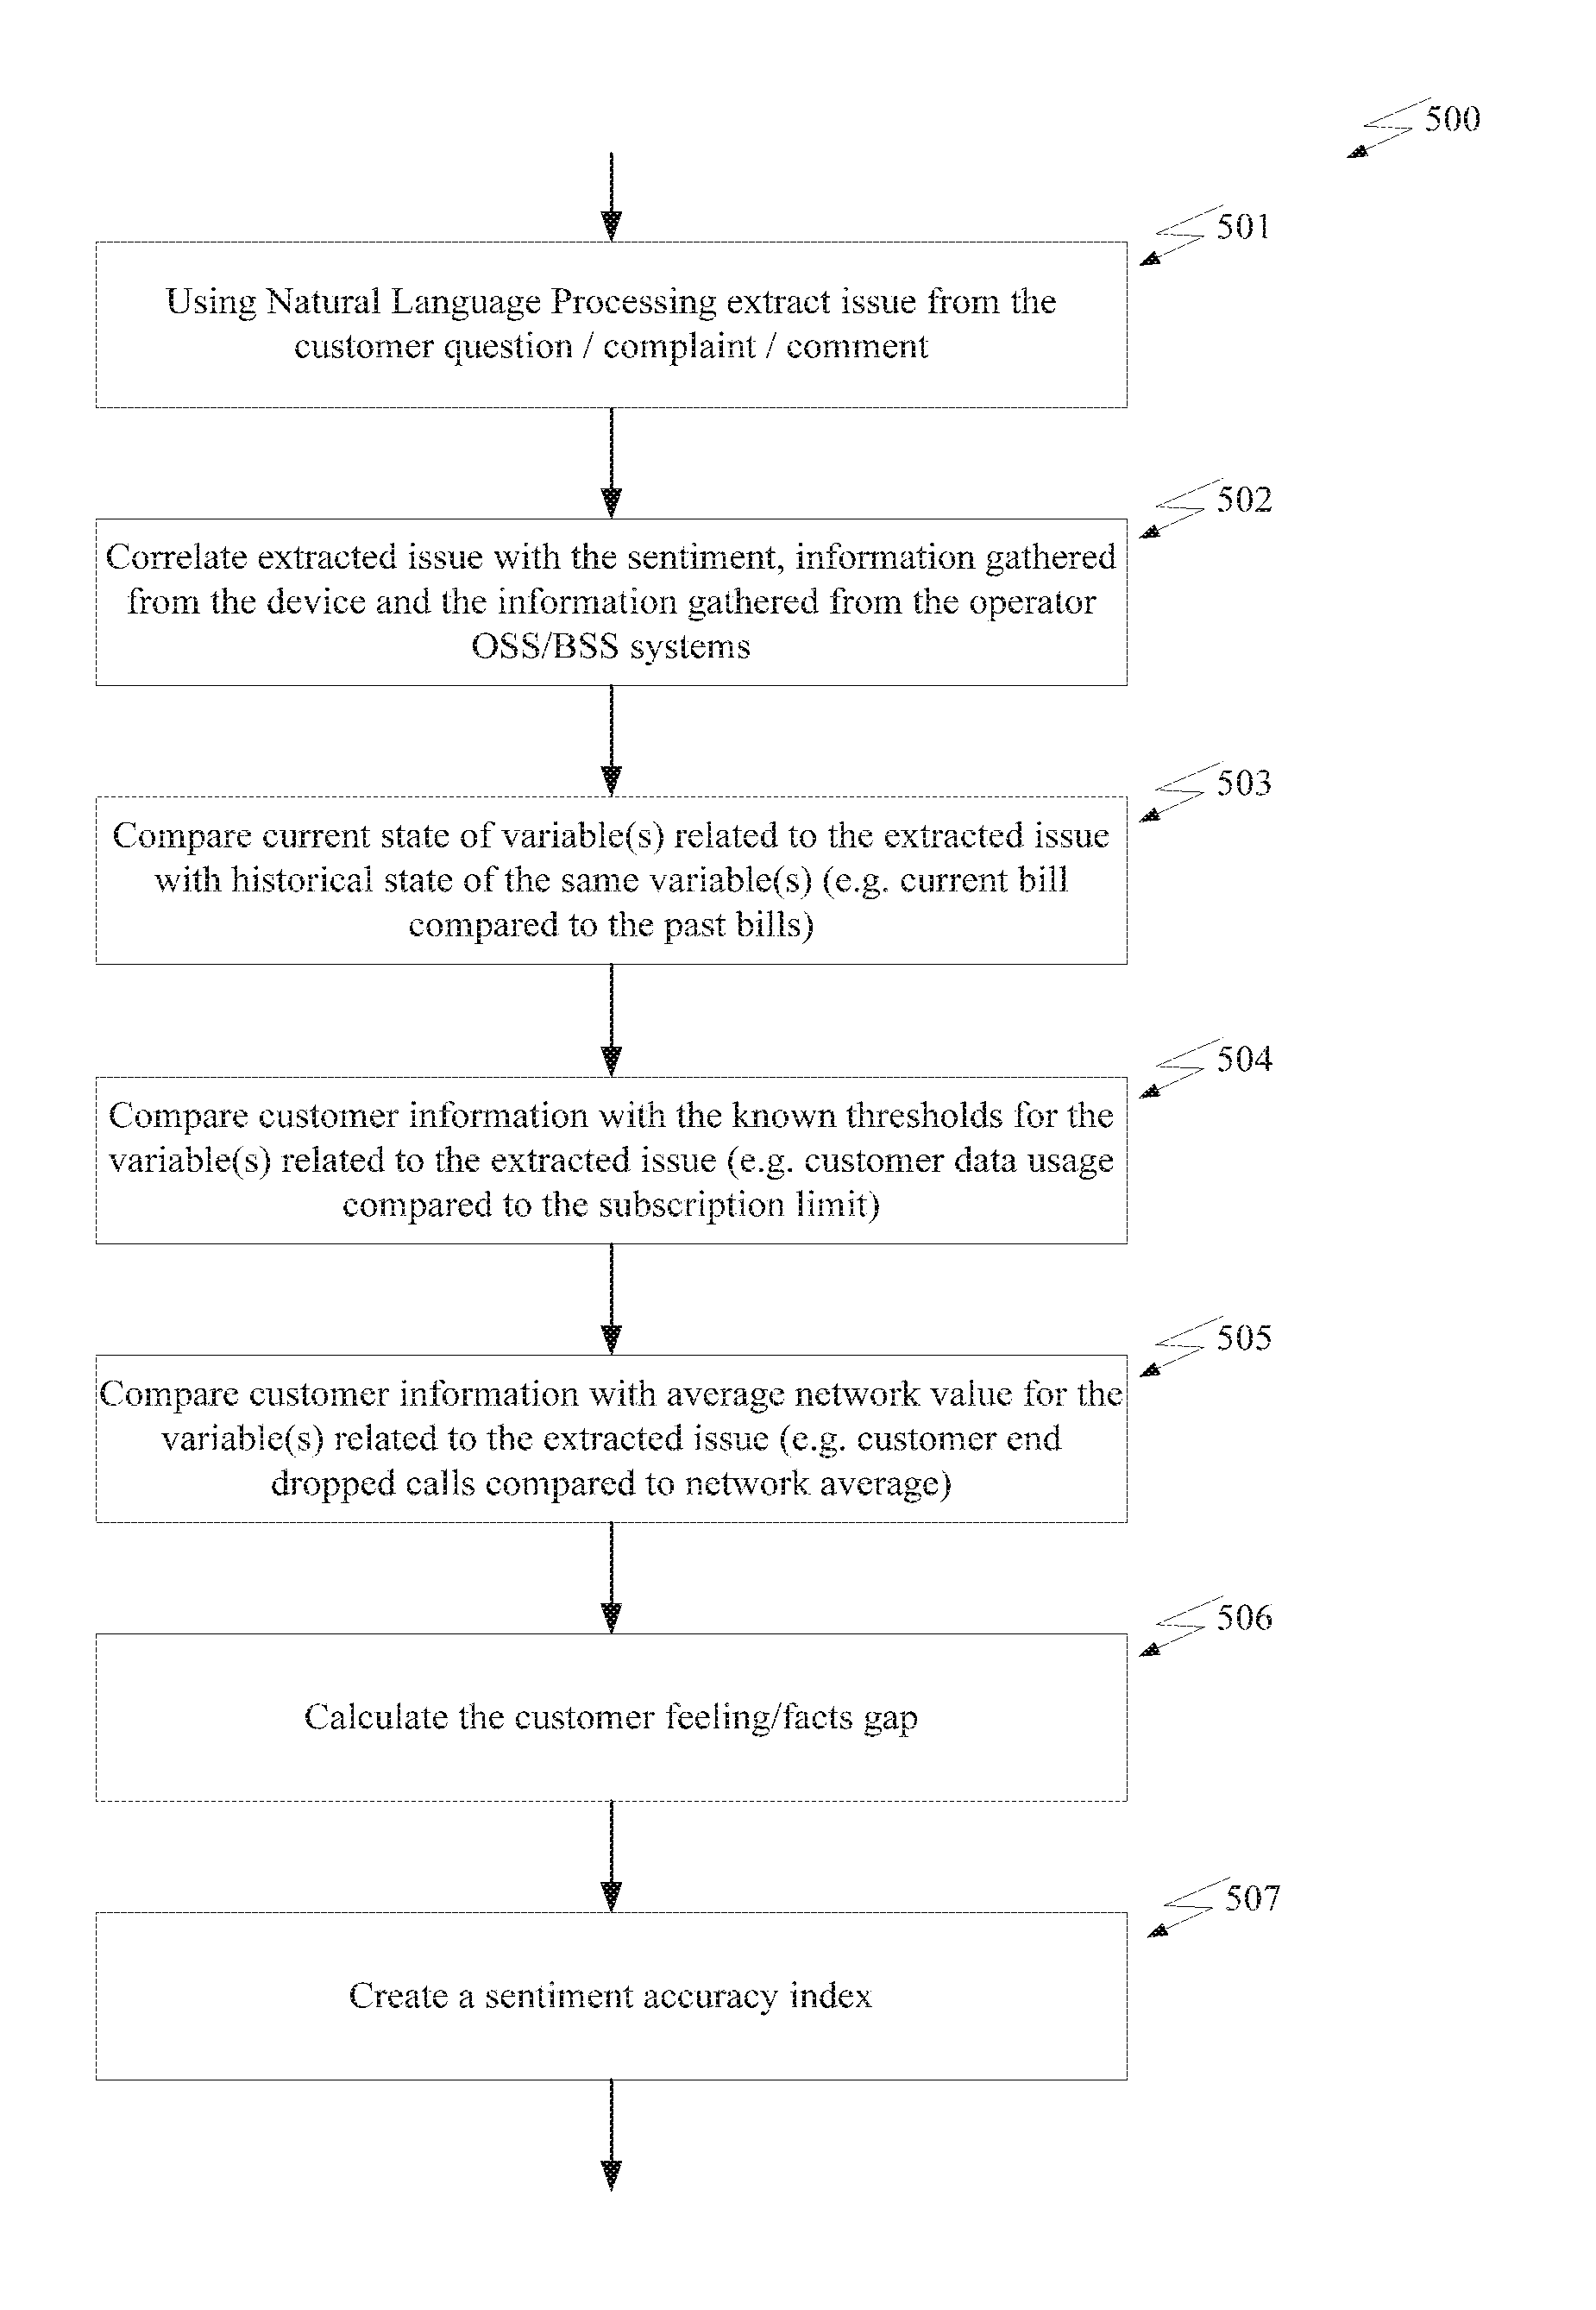 System and method of sentiment accuracy indexing for customer service